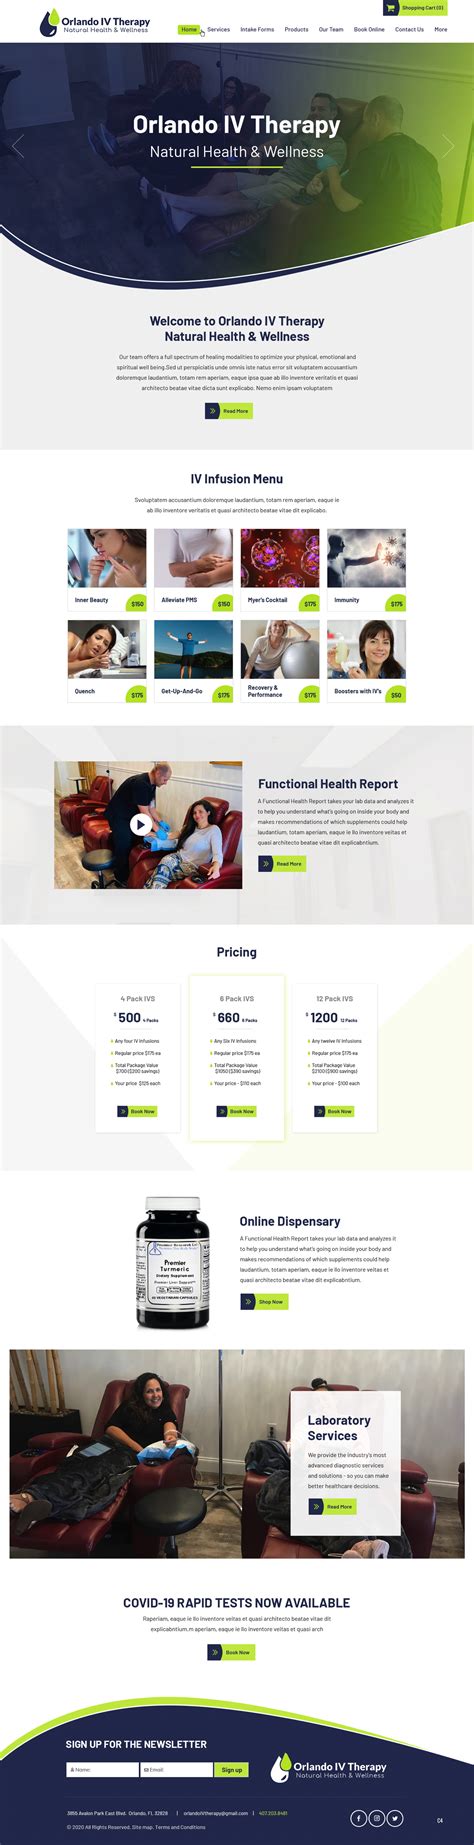 Elegant Playful Health And Wellness Web Design For Orlando Iv Therapy